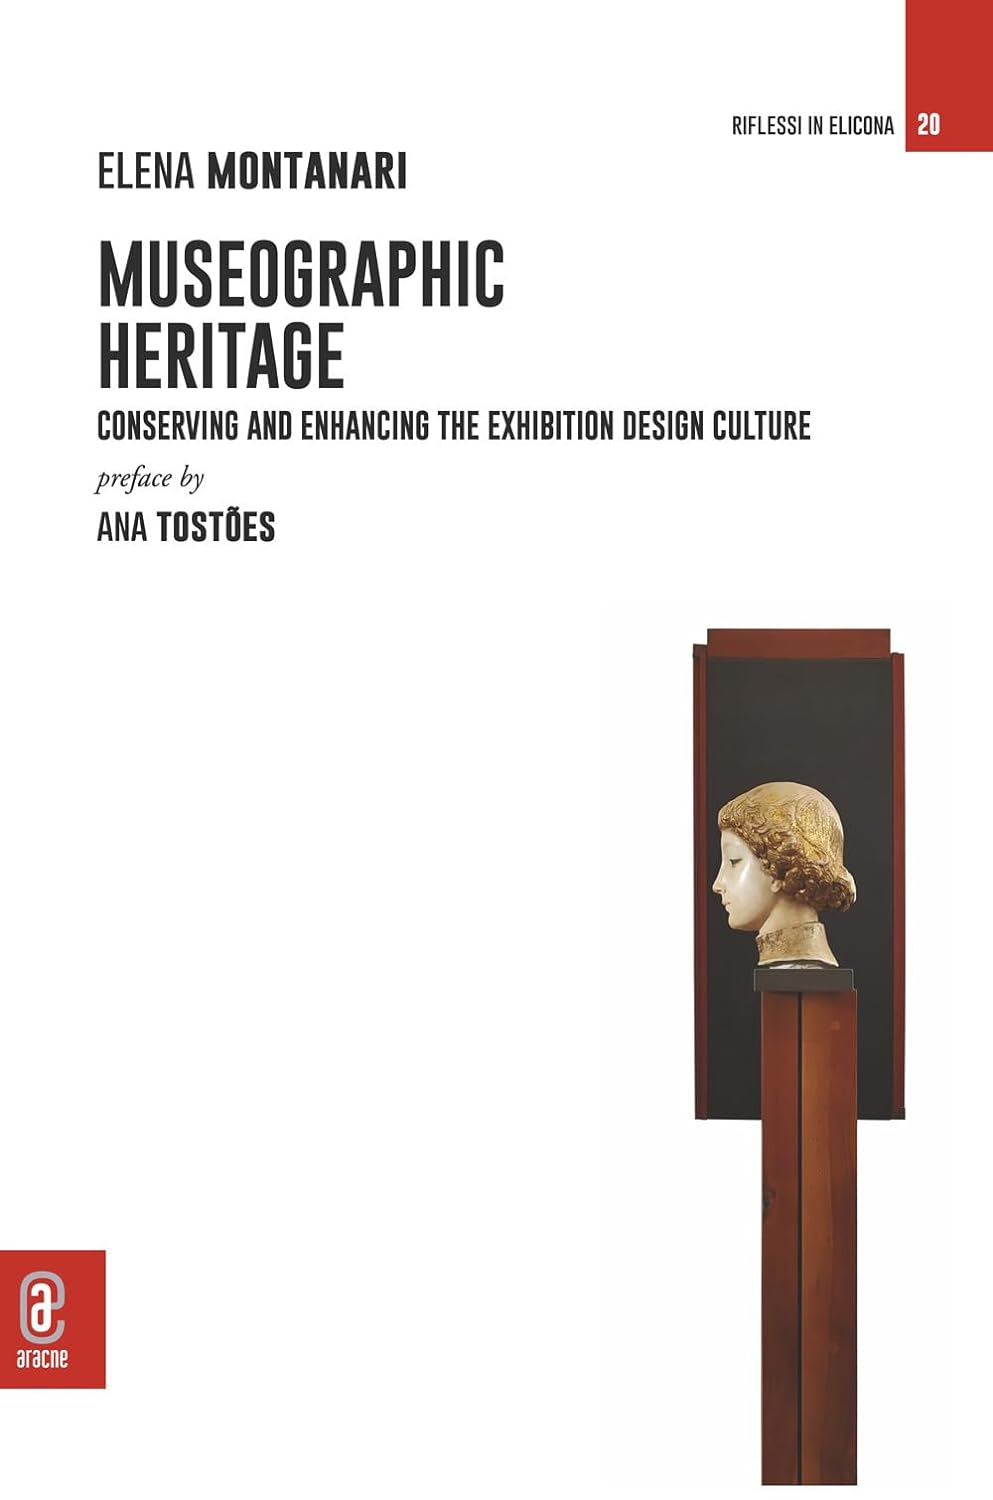 MUSEOGRAPHIC HERITAGE: CONSERVING AND ENHANCING THE EXHIBITION DESIGN CULTURE